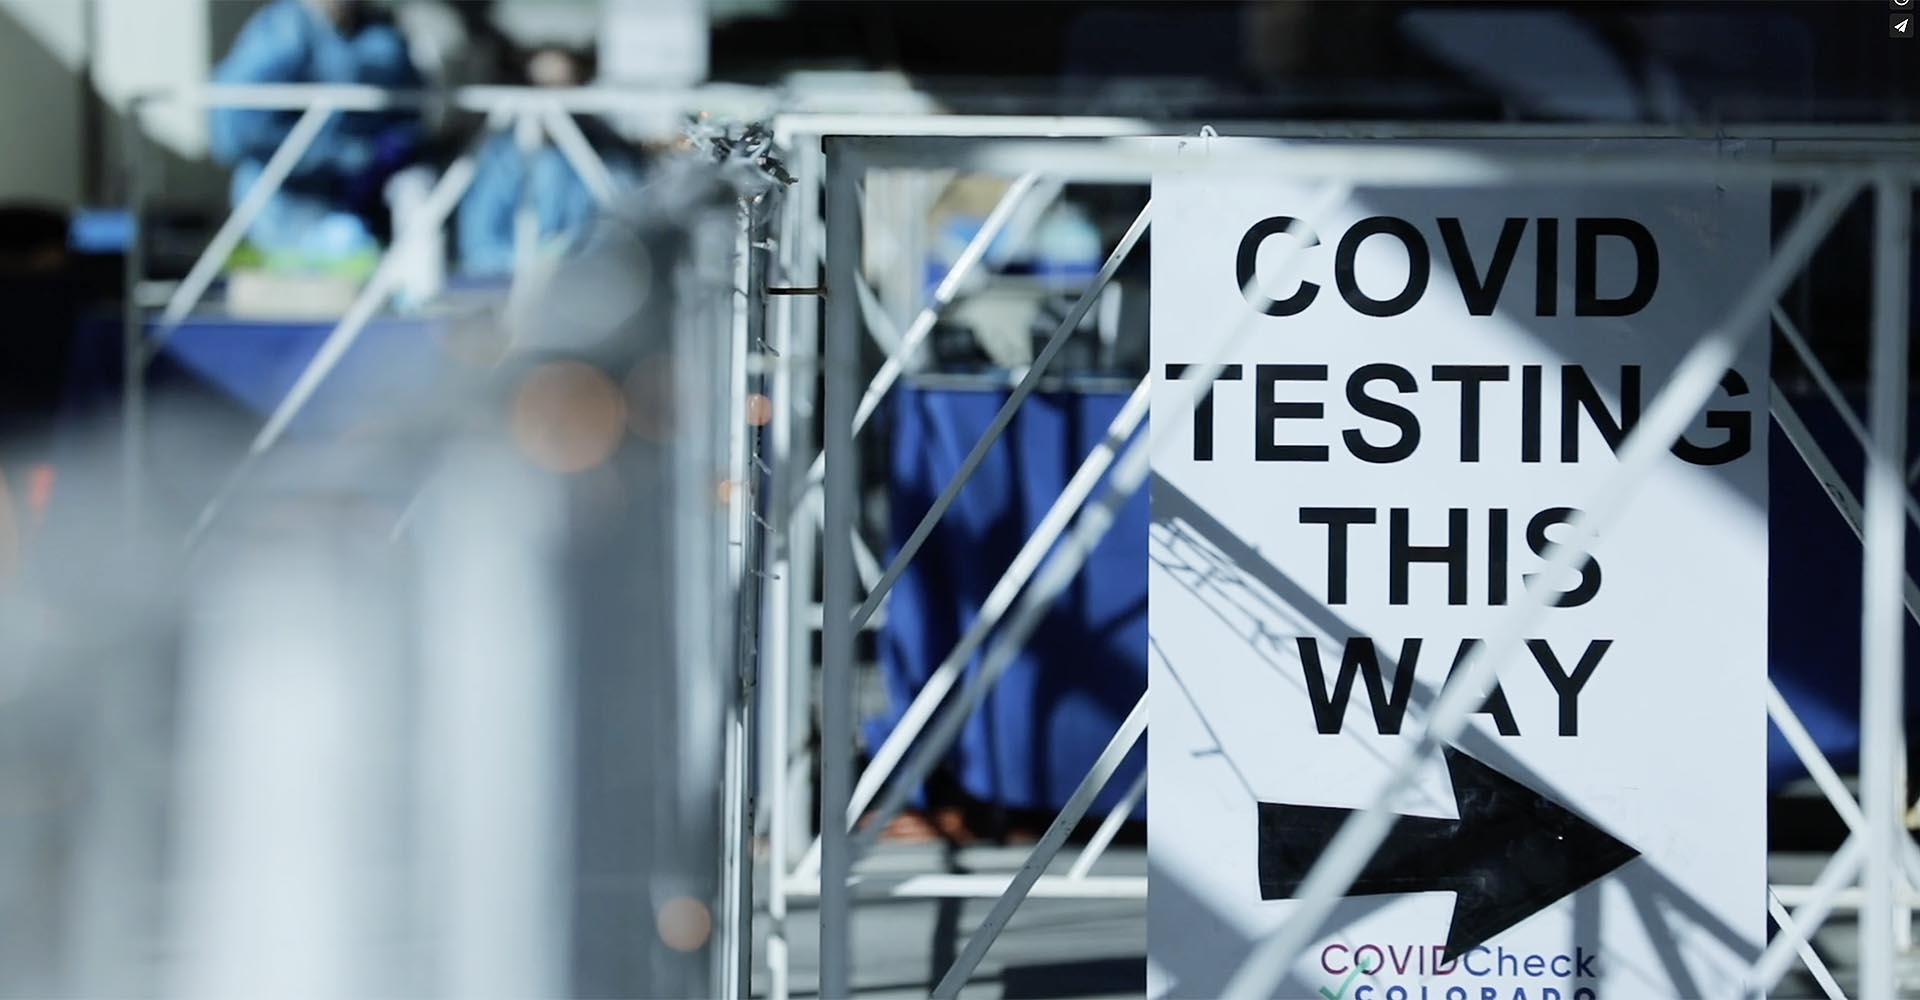 In a positive sign, demand for Covid tests eases. But health experts warn against complacency